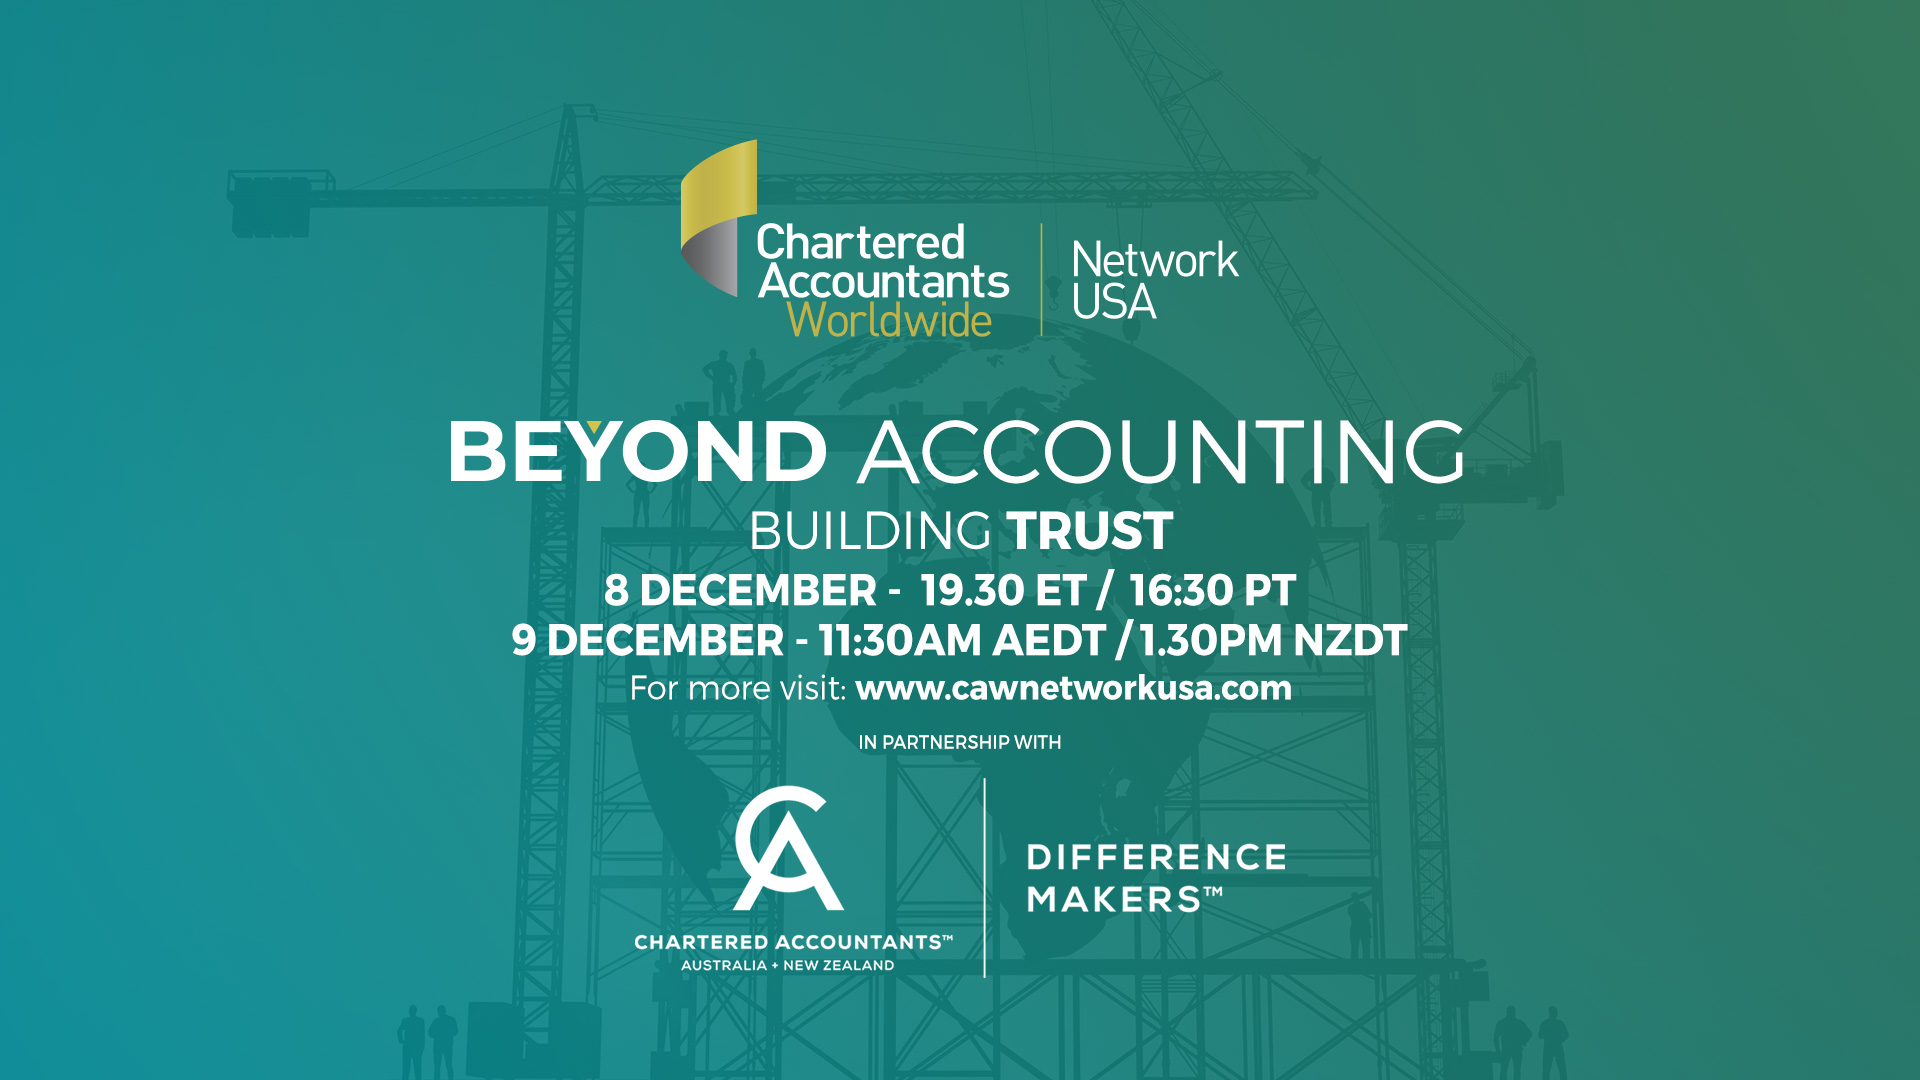 Beyond Accounting – Building Trust